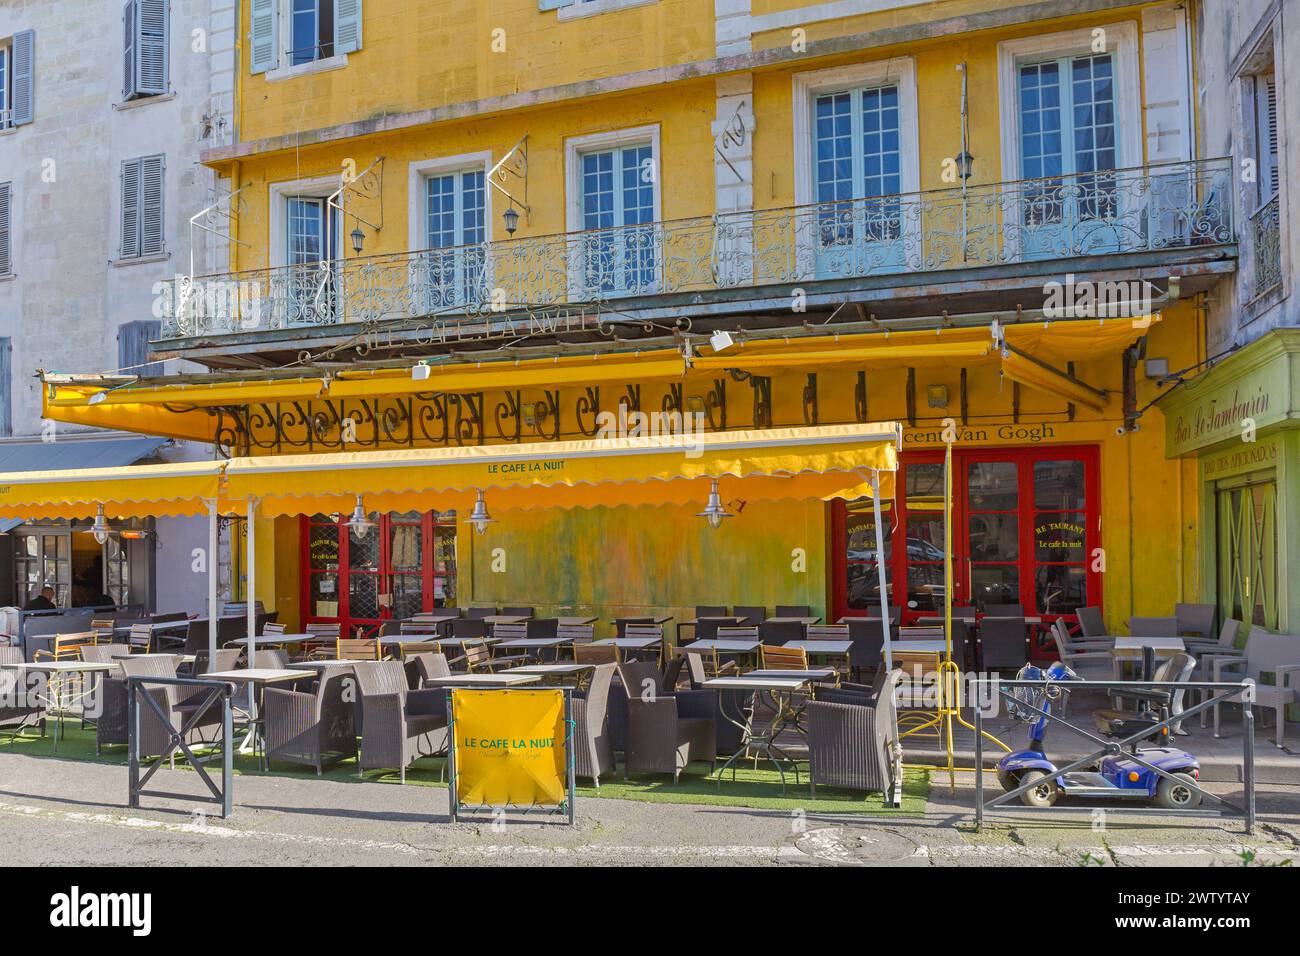 Arles, France - January 29, 2016: Famous Yellow Coffee Shop Le Cafe La Nuit Vincent Van Gogh at Place du Forum in Old Town. Stock Photo